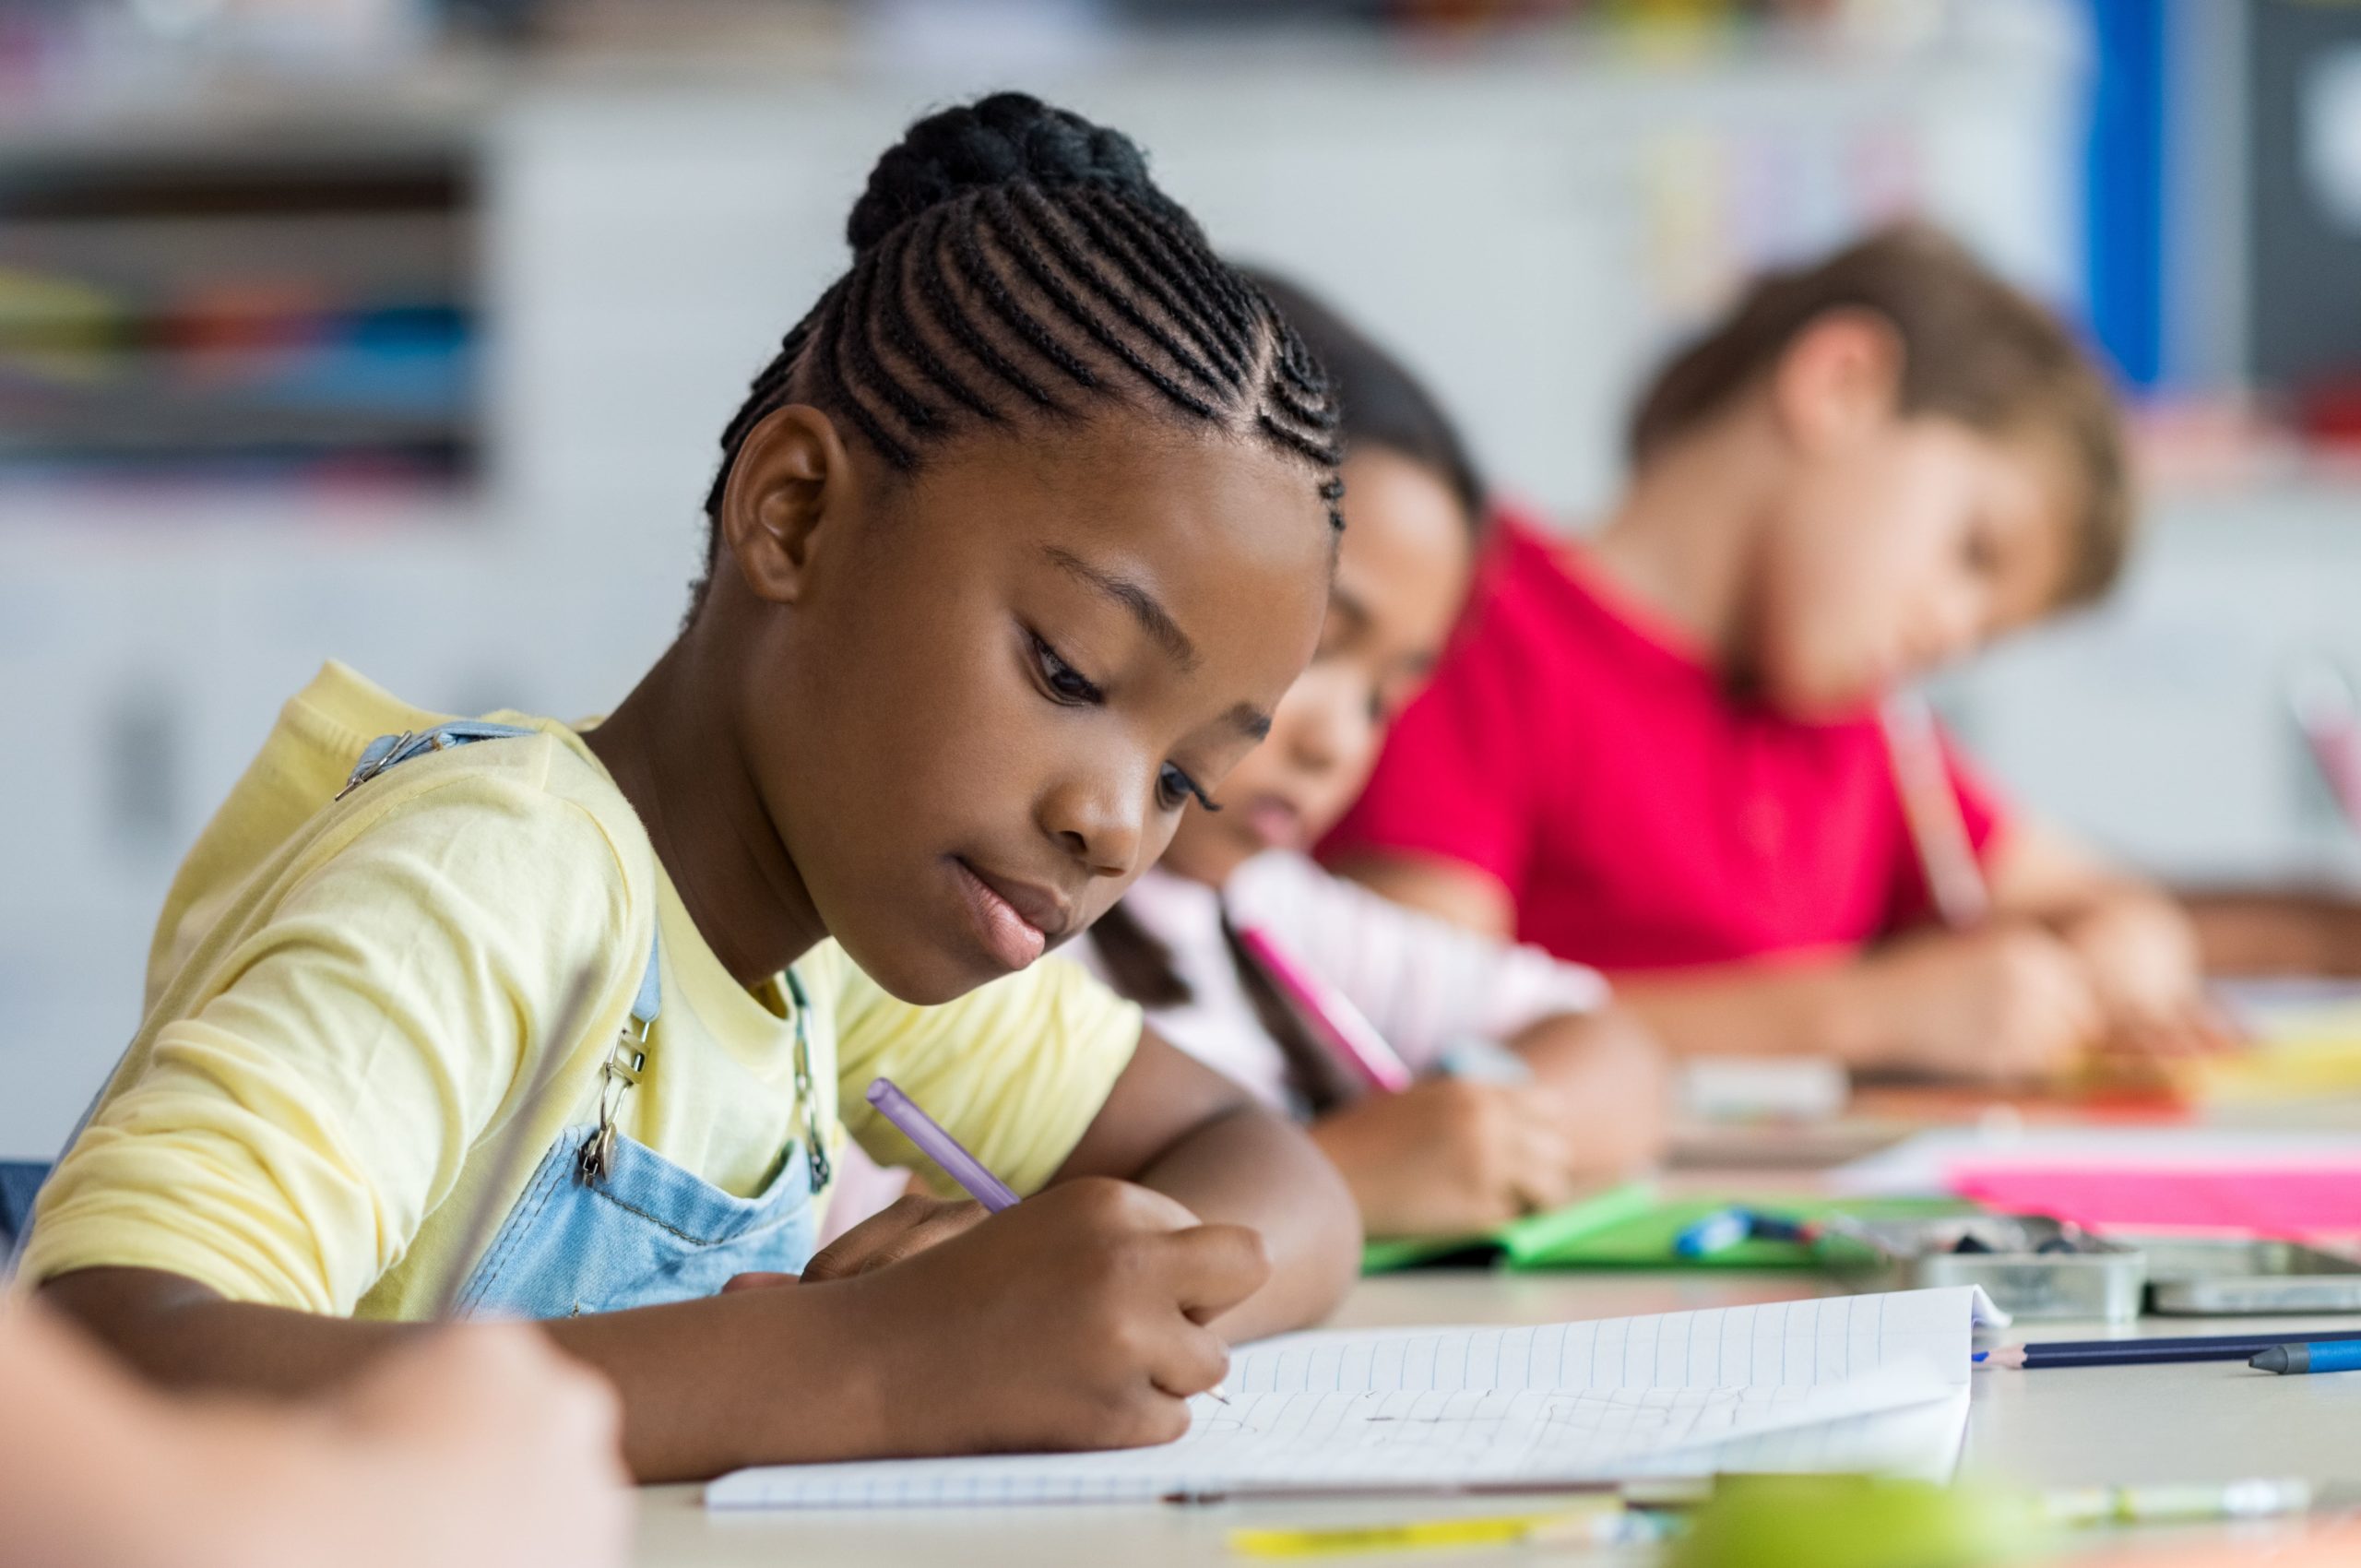 young black girl focused on writing assignment